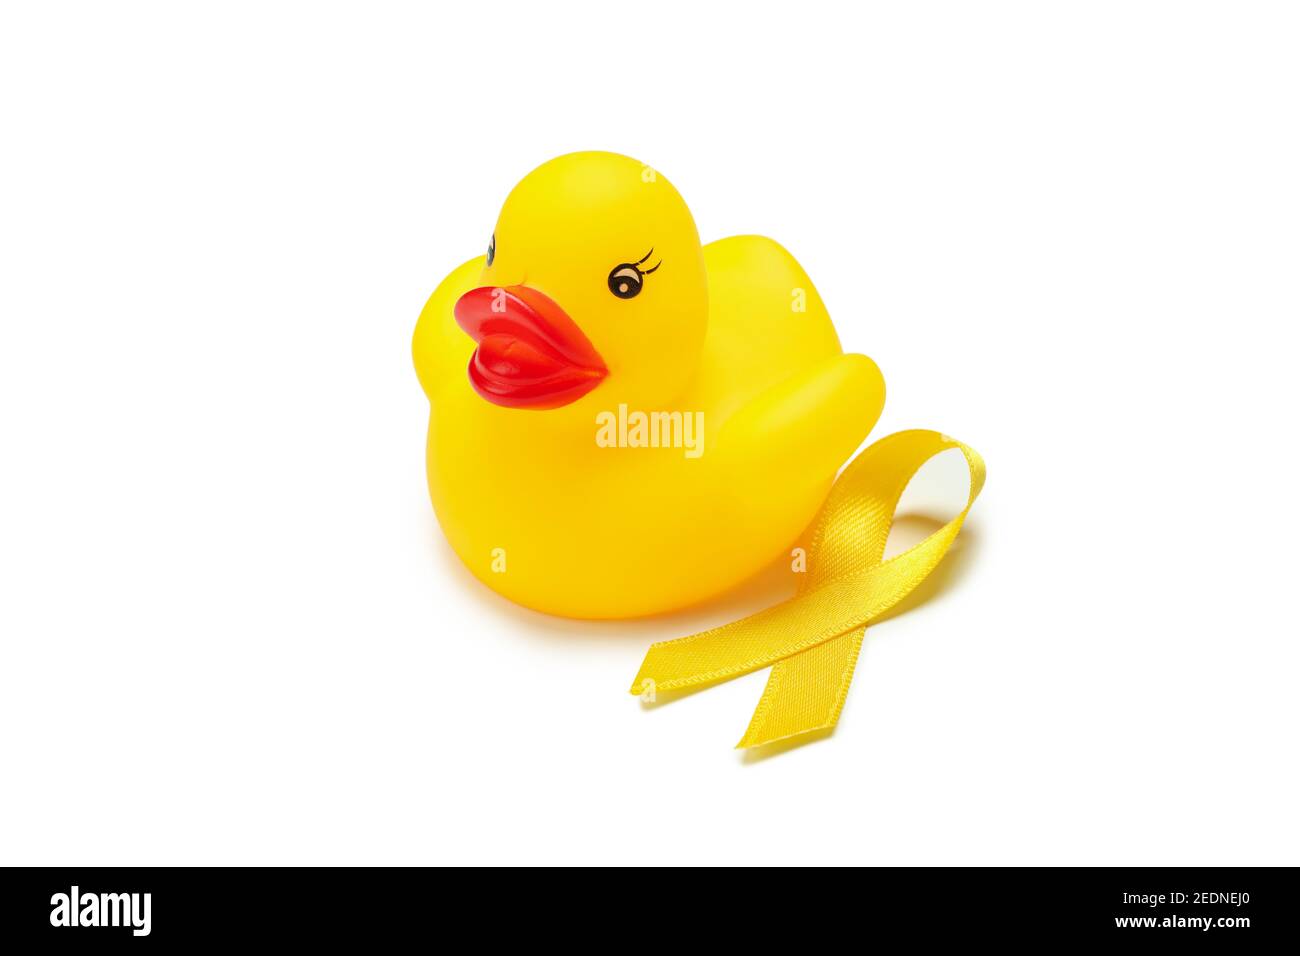 Yellow awareness ribbon and rubber duck isolated on white background Stock Photo